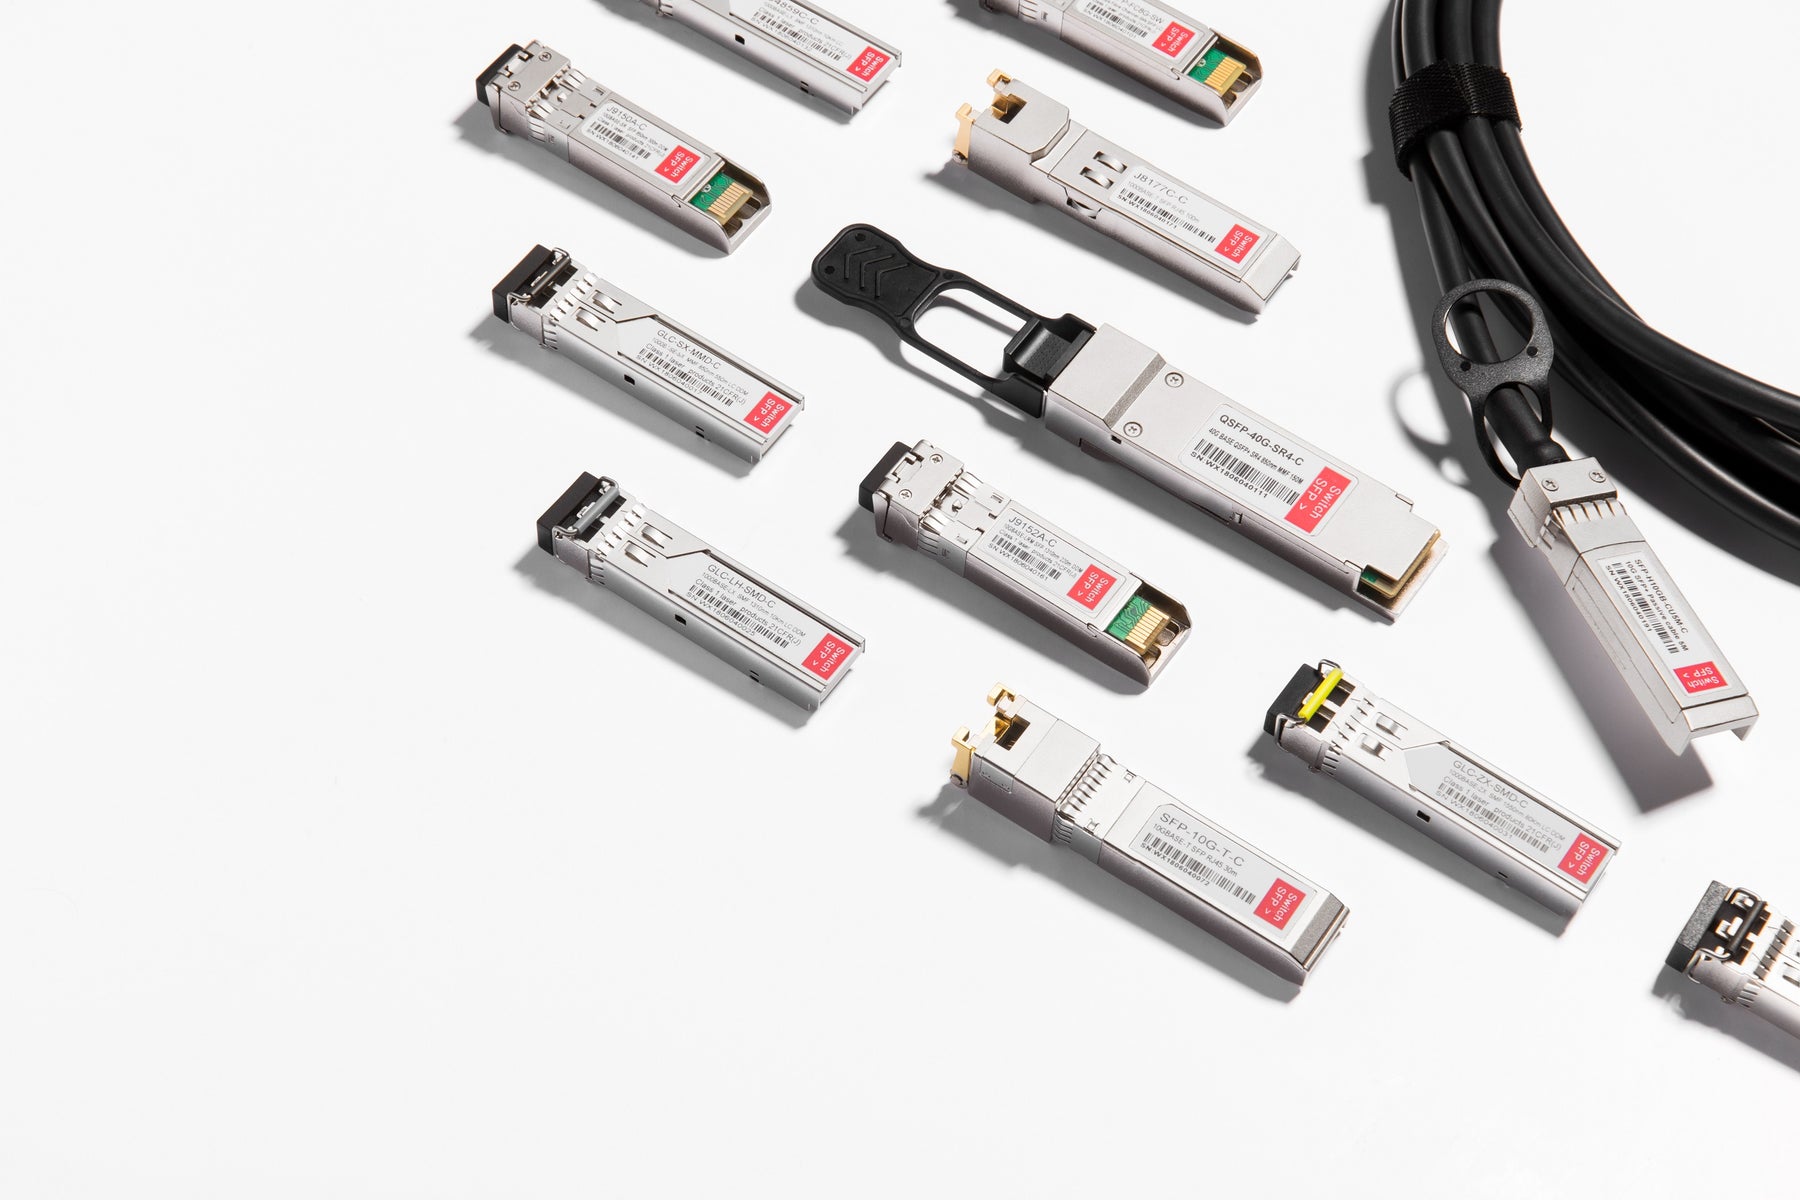 Switch SFP Ltd is a UK based trusted and reliable partner for over 60 Vendor compatible optical Transceivers.